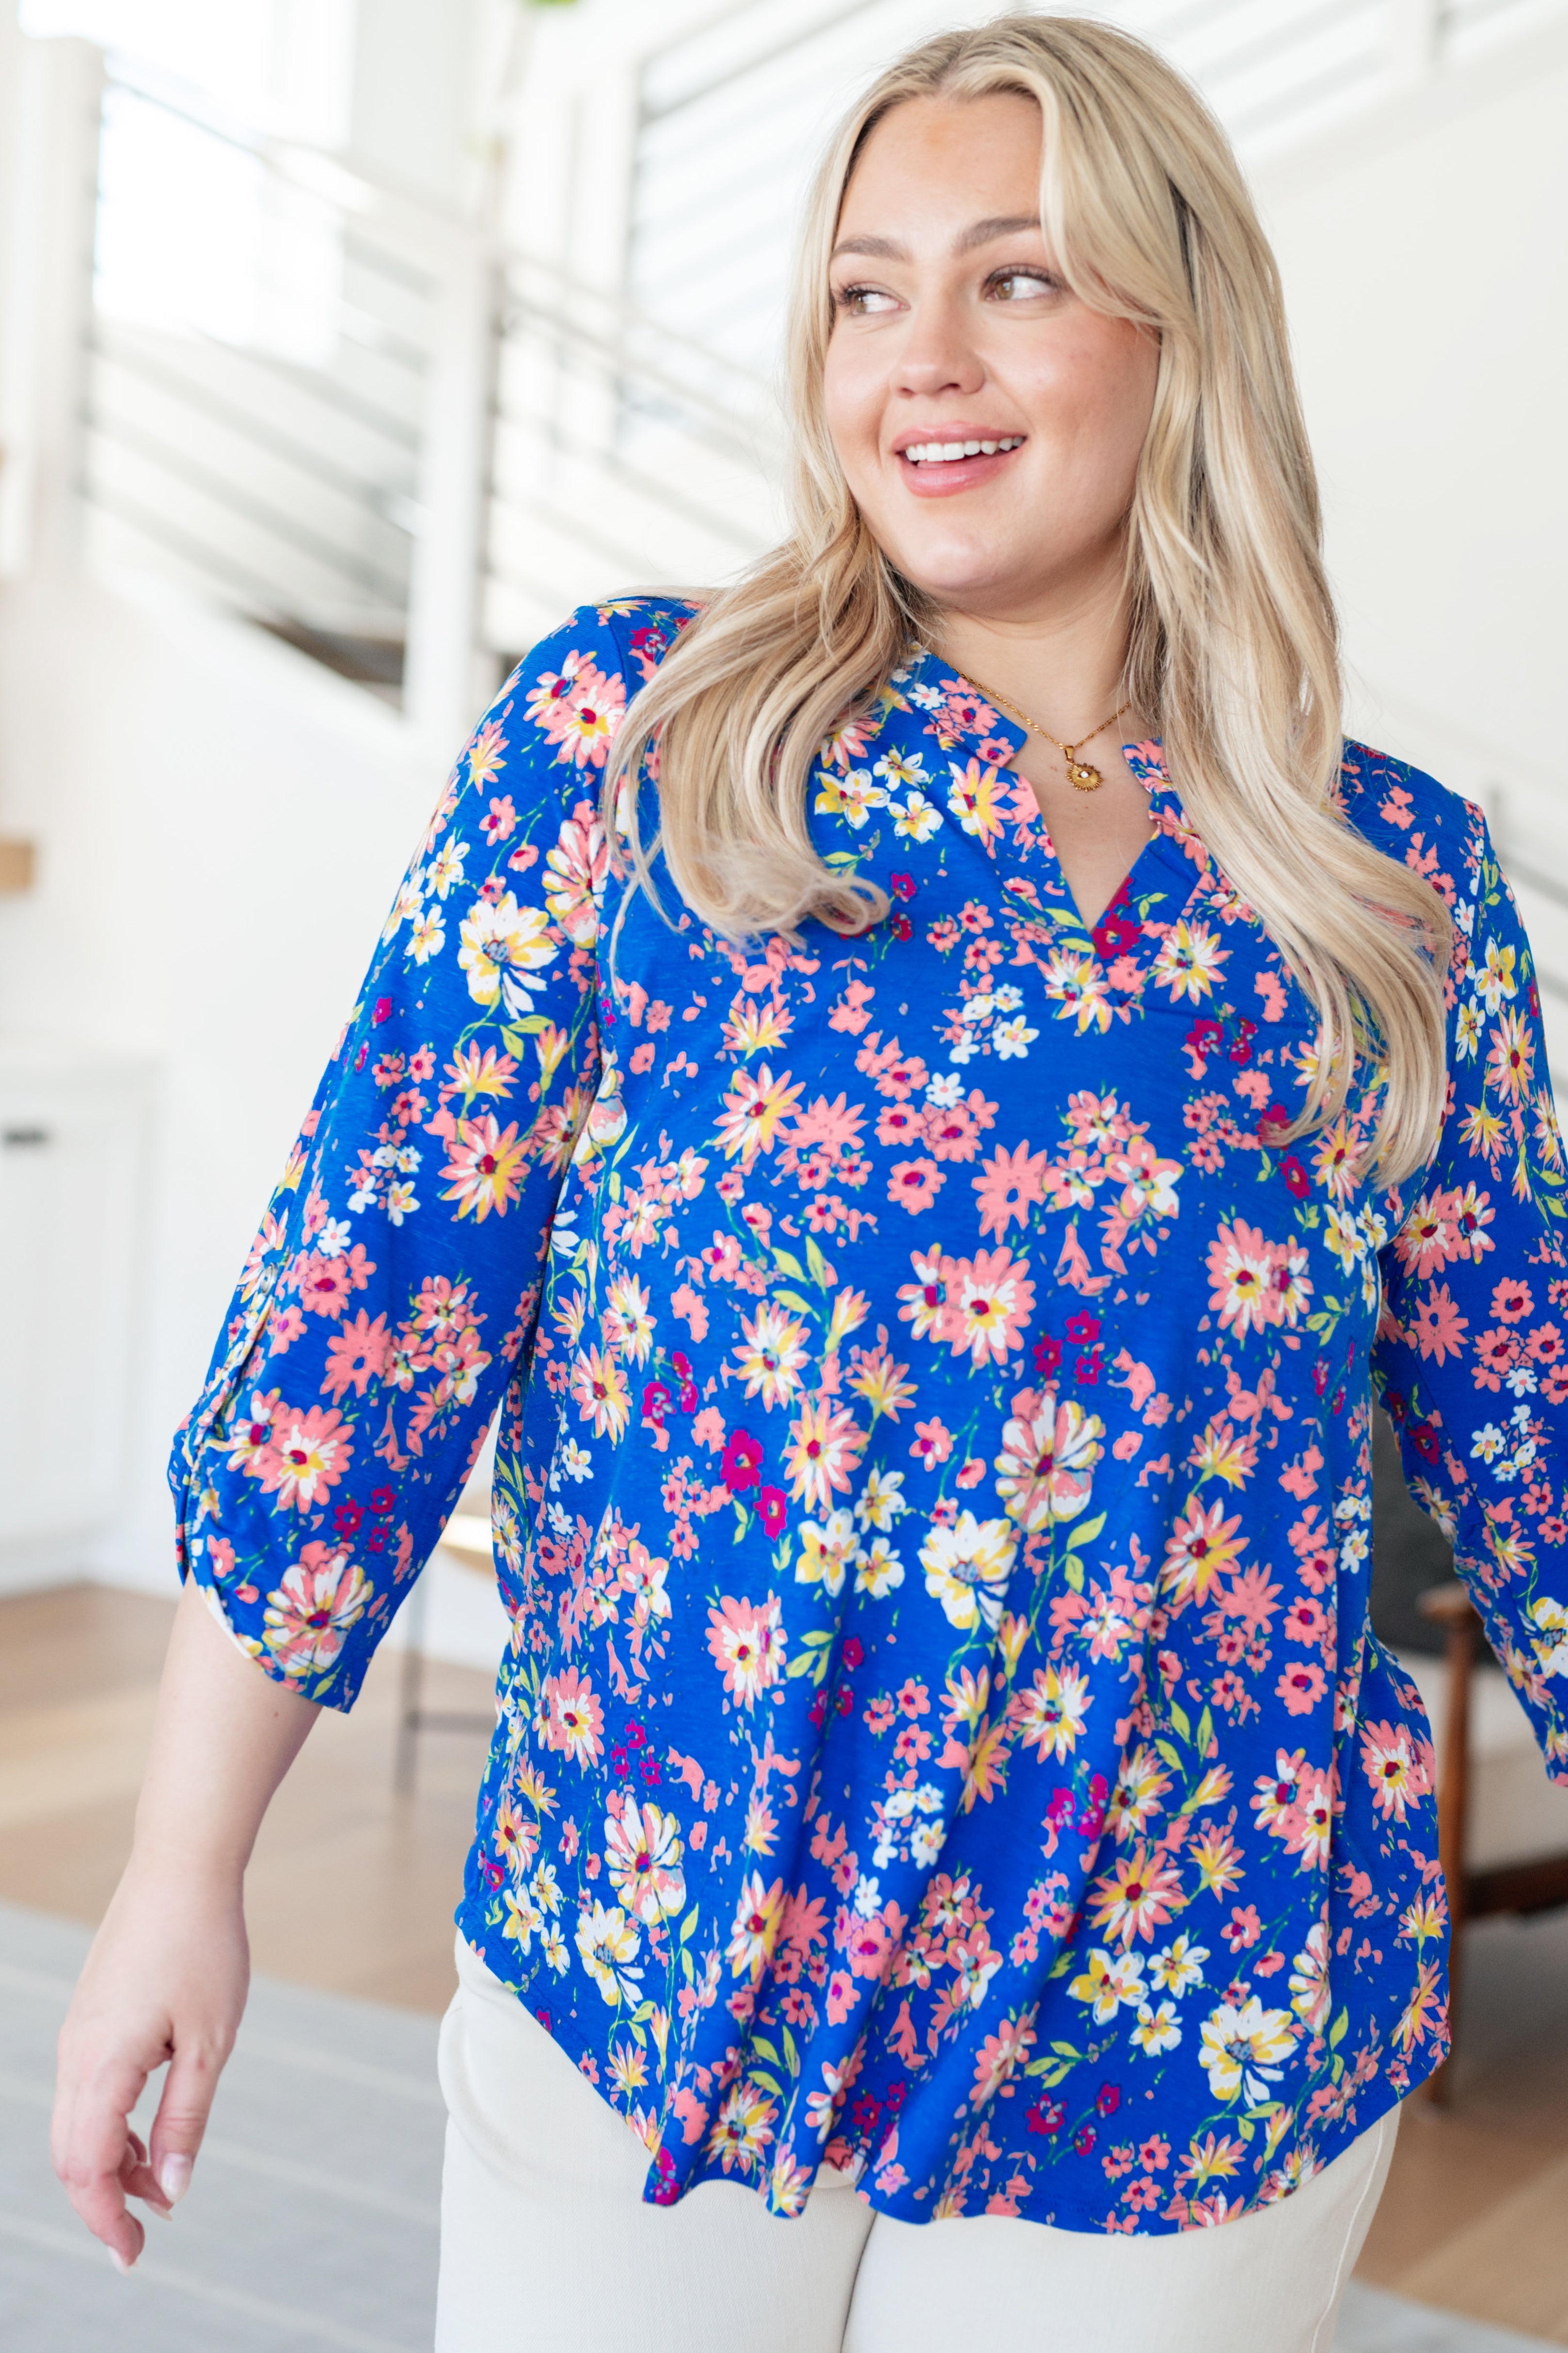 Lizzy Top in Royal and Blush Floral Tops Ave Shops   